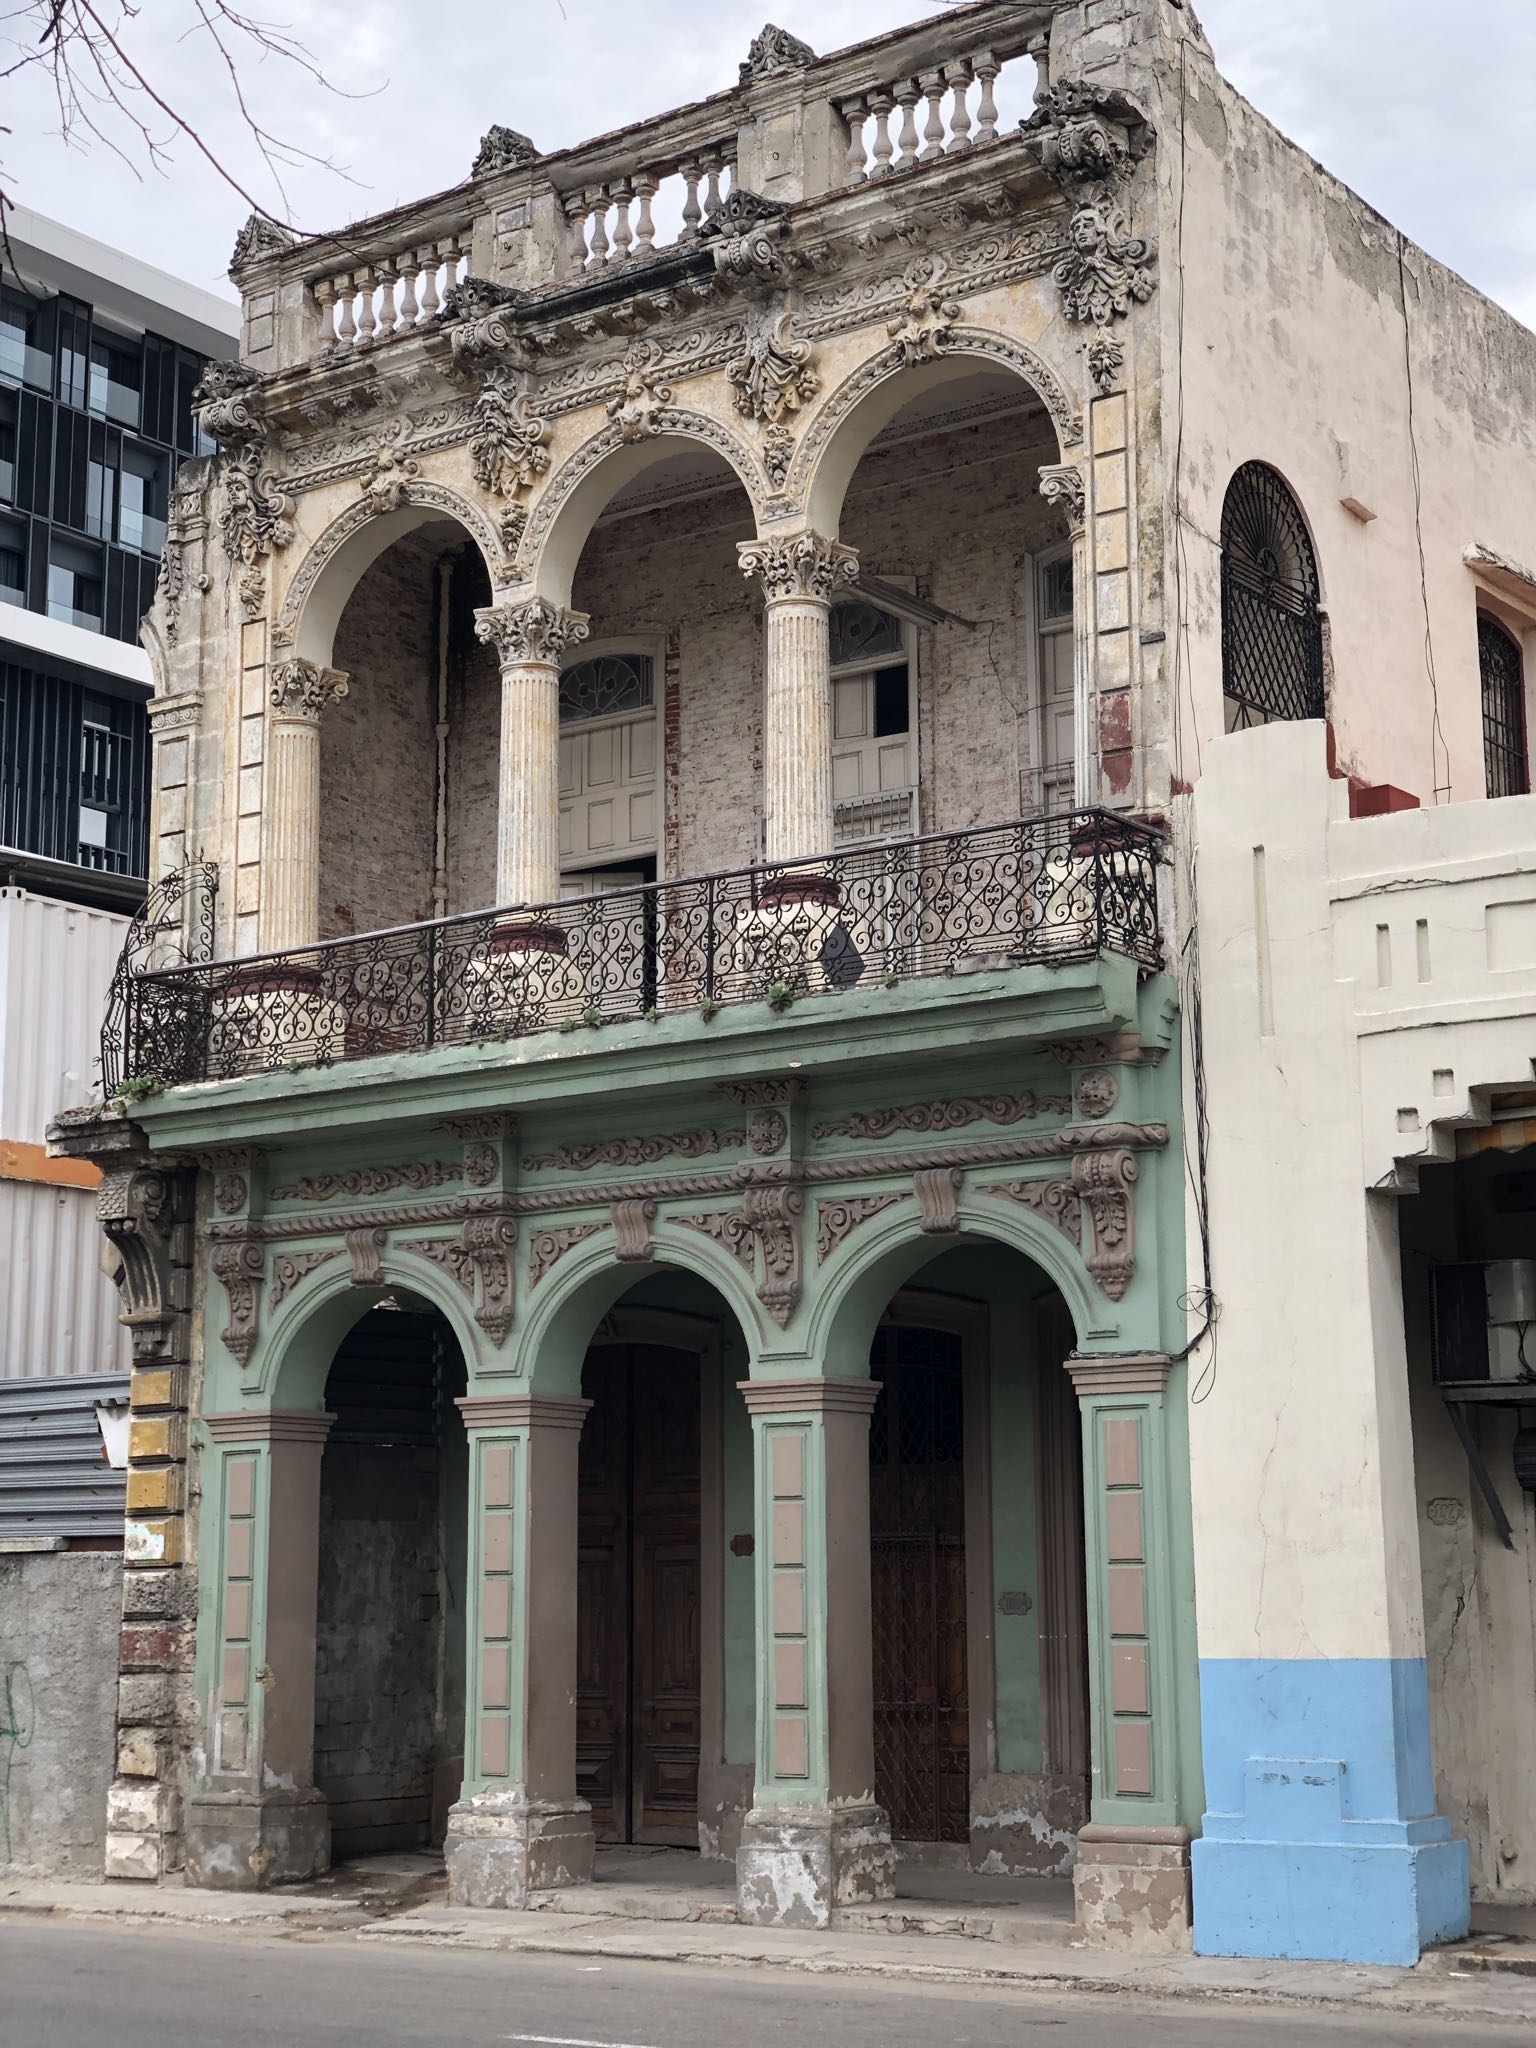 Photo 27 of 221 from the album Highlights Cuba 2019.